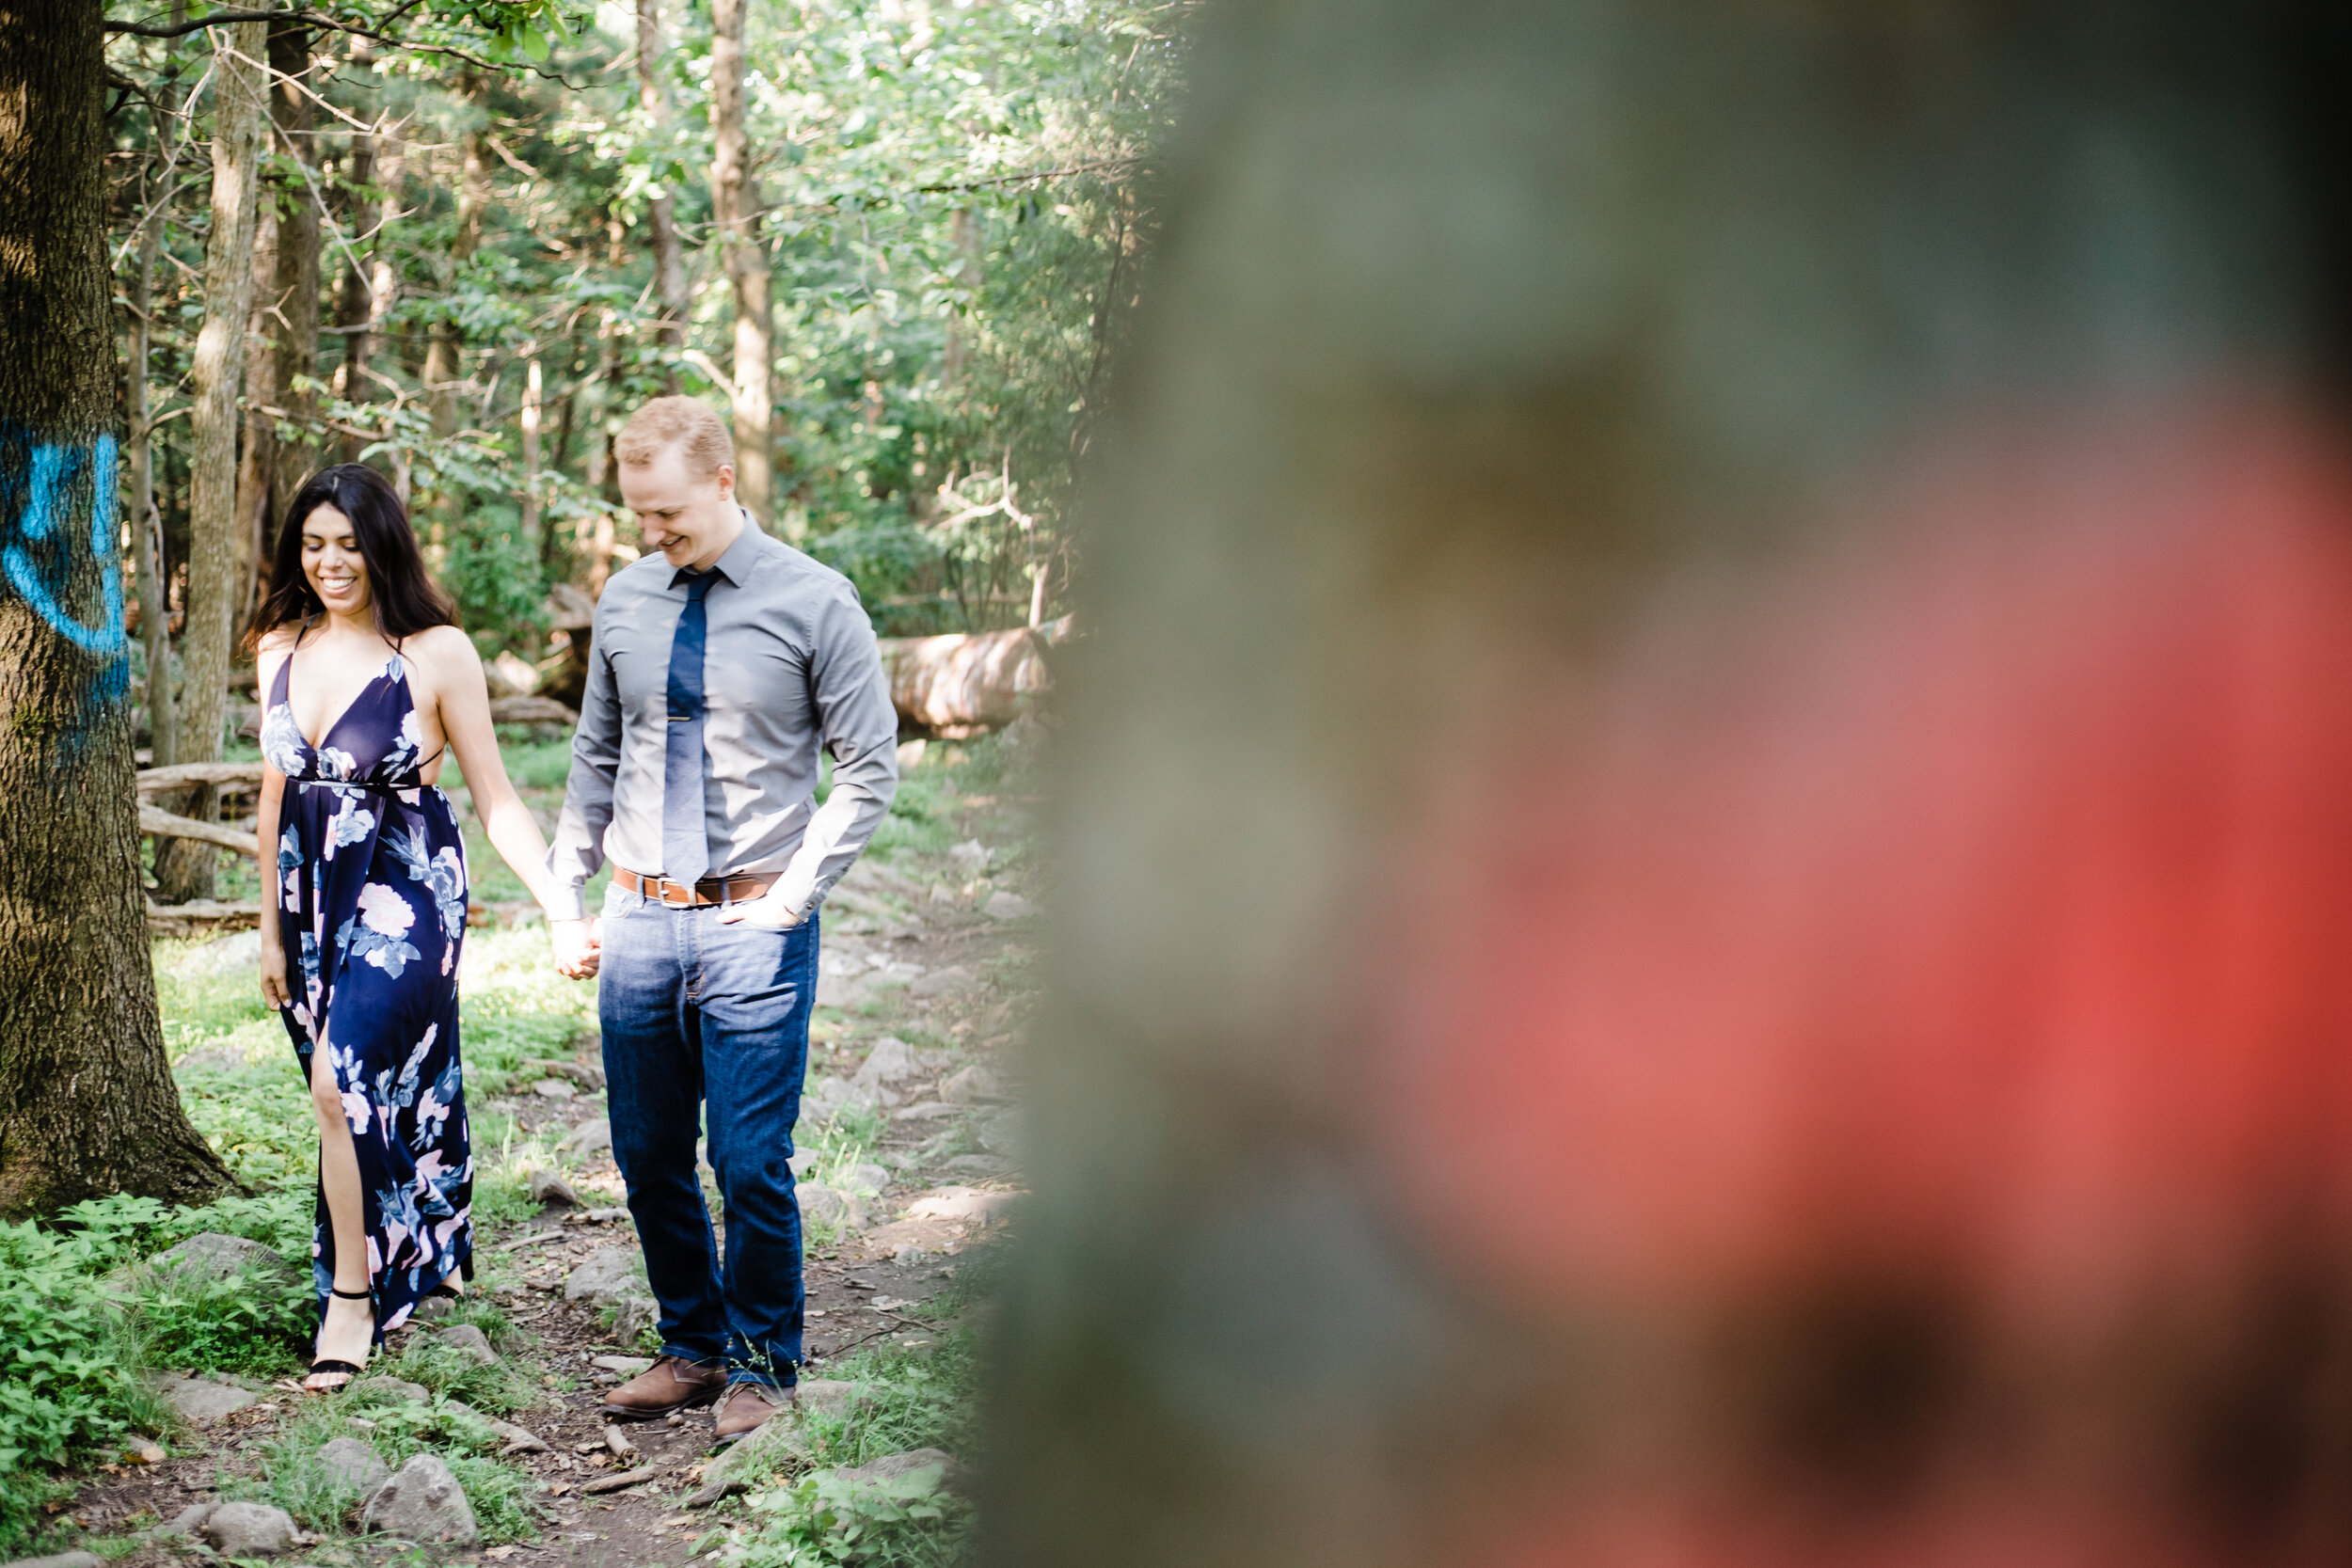 Engagement Session at High Rock Mountain in Western Maryland by Megapixels Media Photography best husband and wife wedding photographers-26.jpg